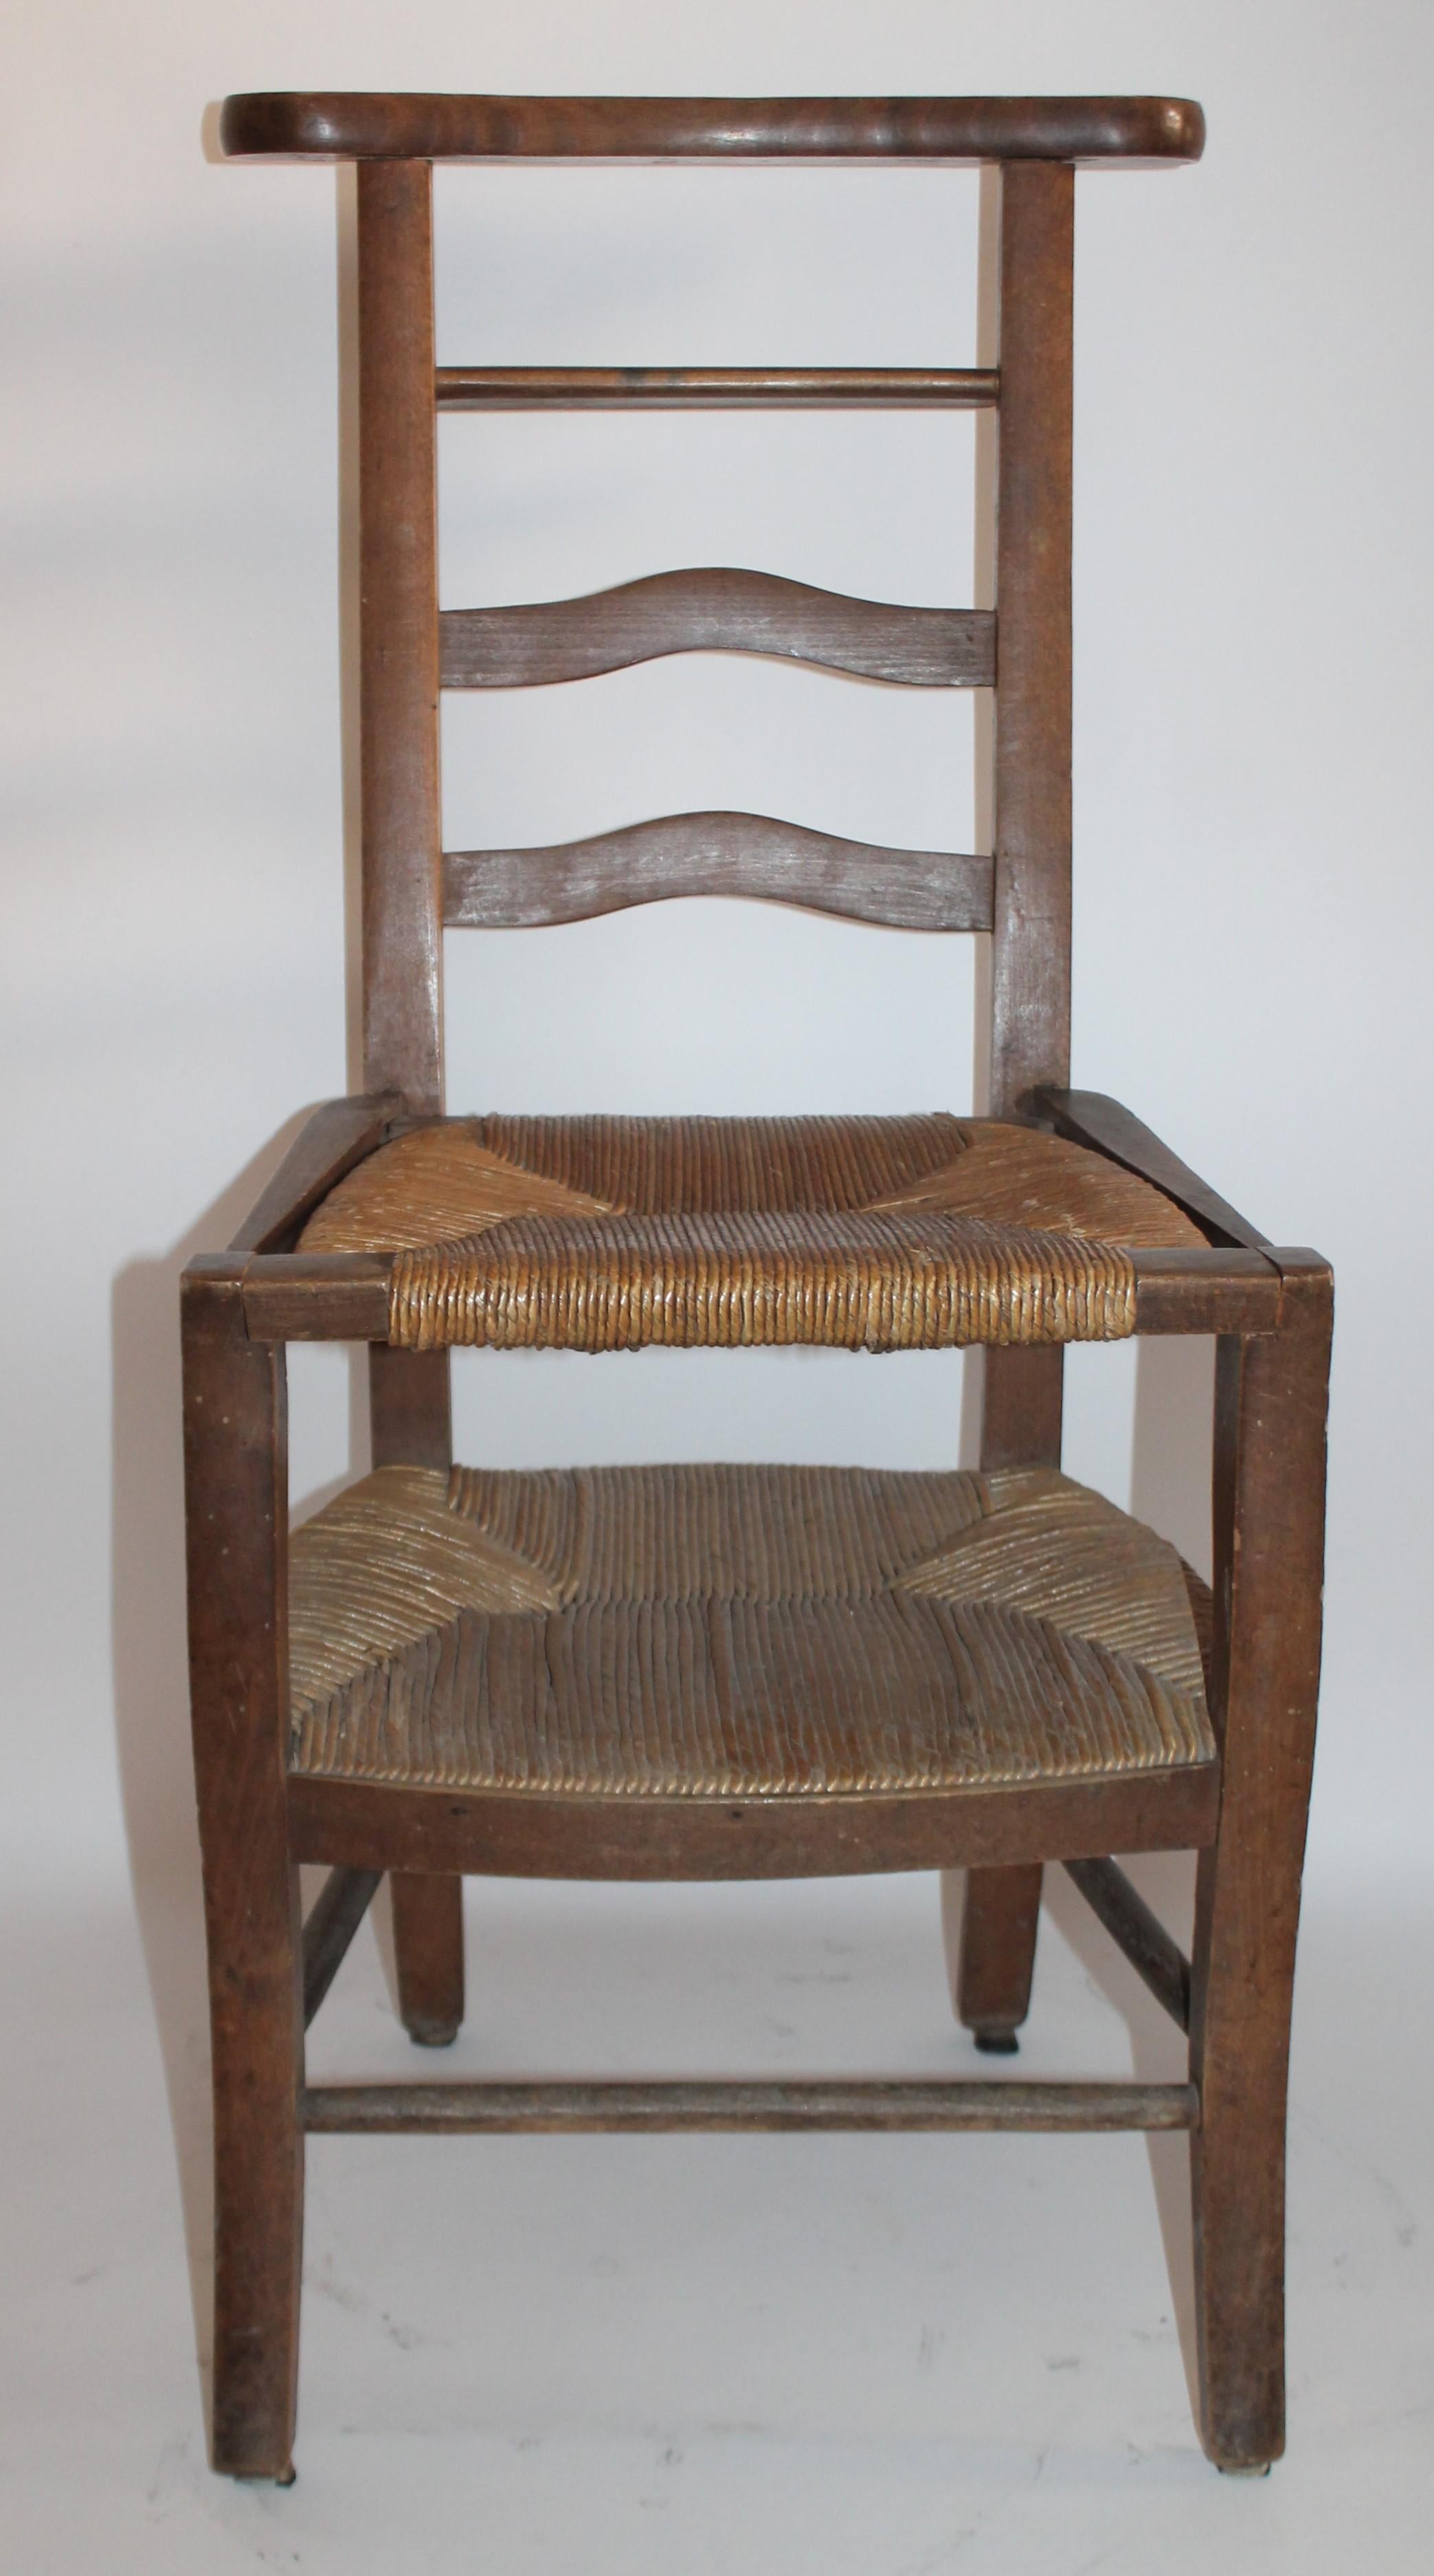 19th century lift top high chair for children with beautiful cane lift top seat.